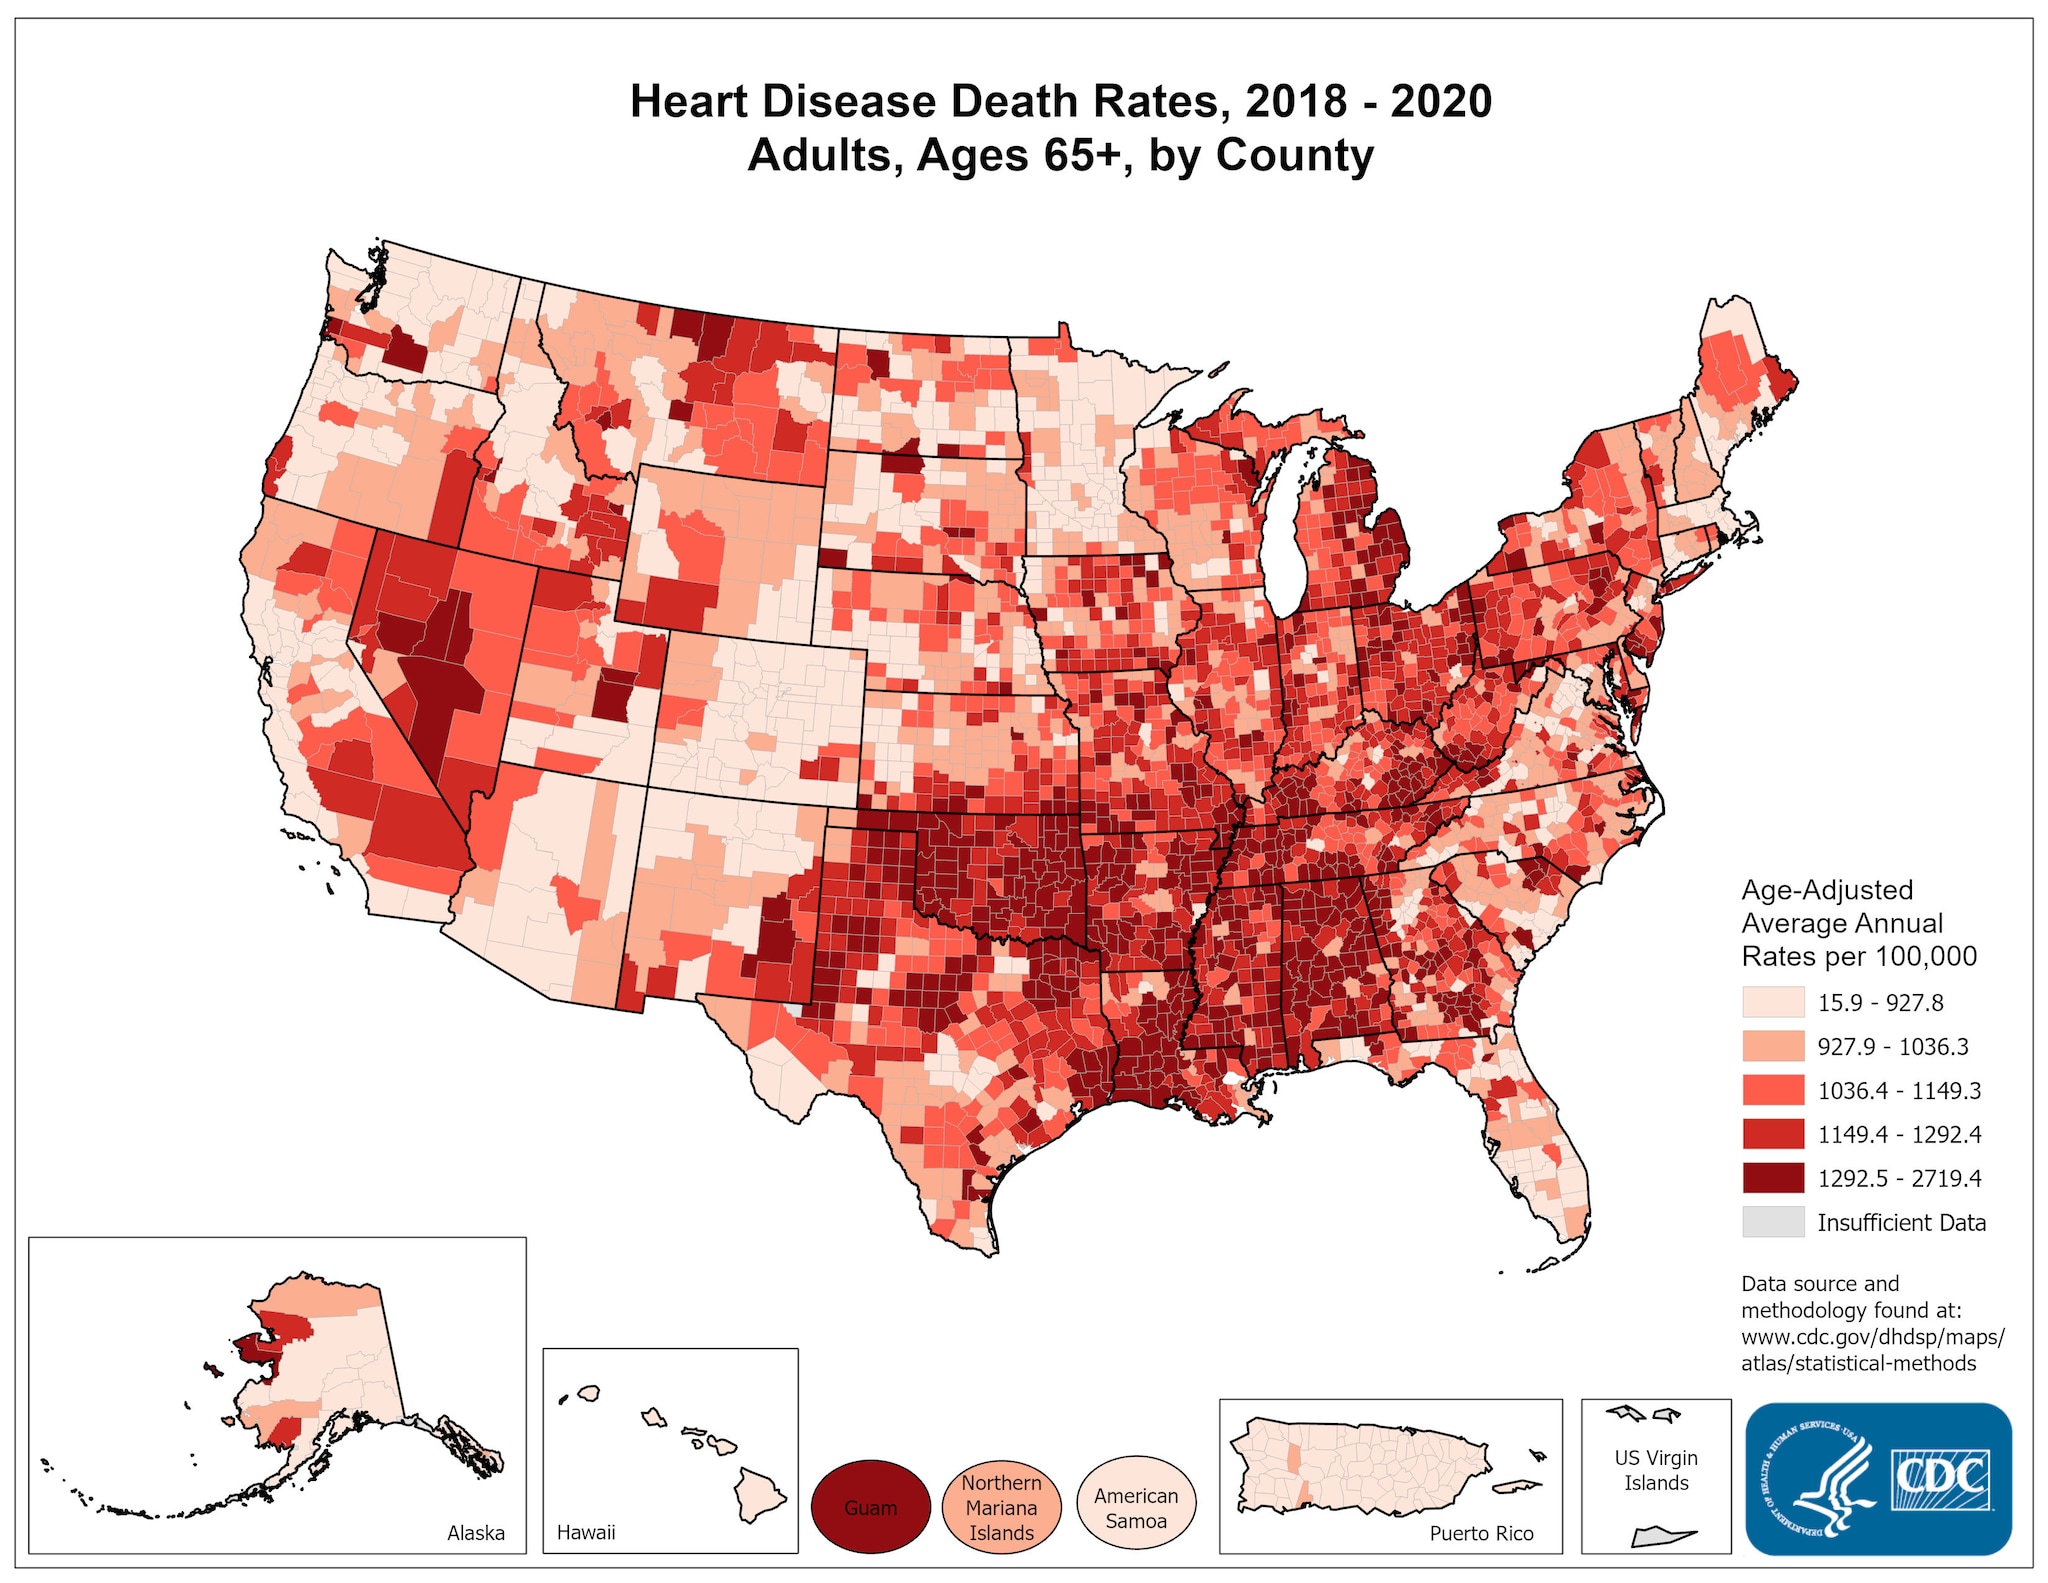 Heart Disease Death Rates for 2017-2019 for Adults Aged 65 Years and Older by County